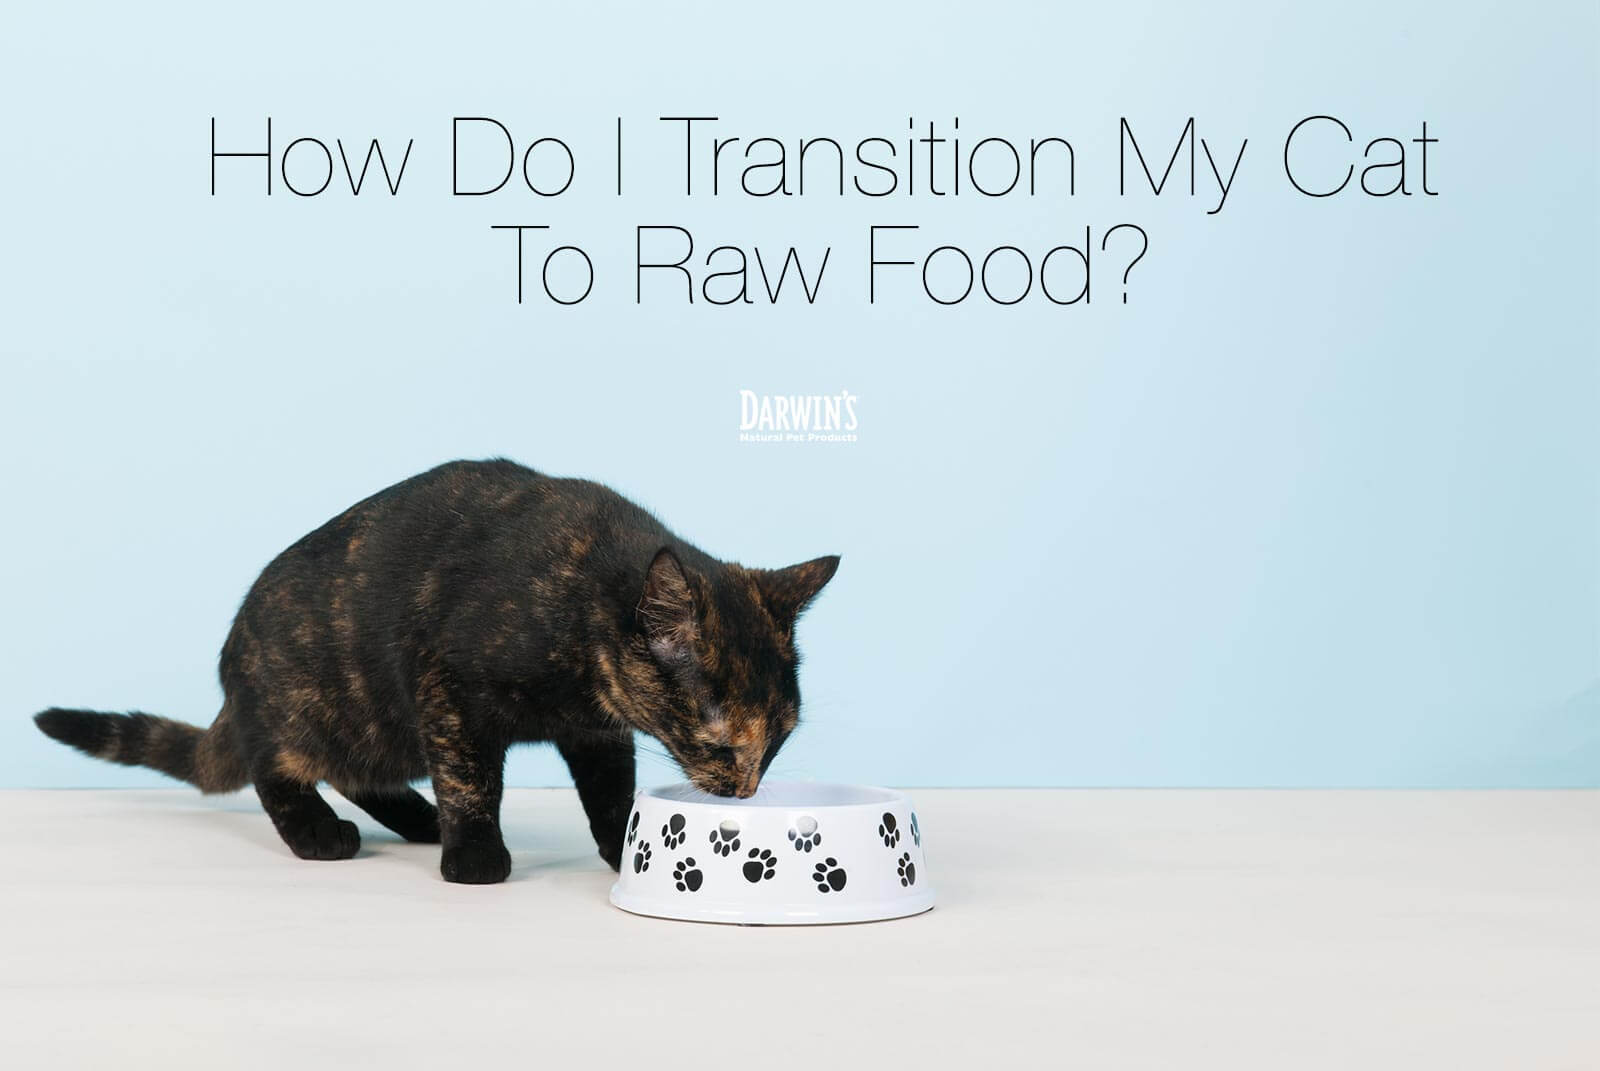 How Do I Transition My Cat to Raw Food?